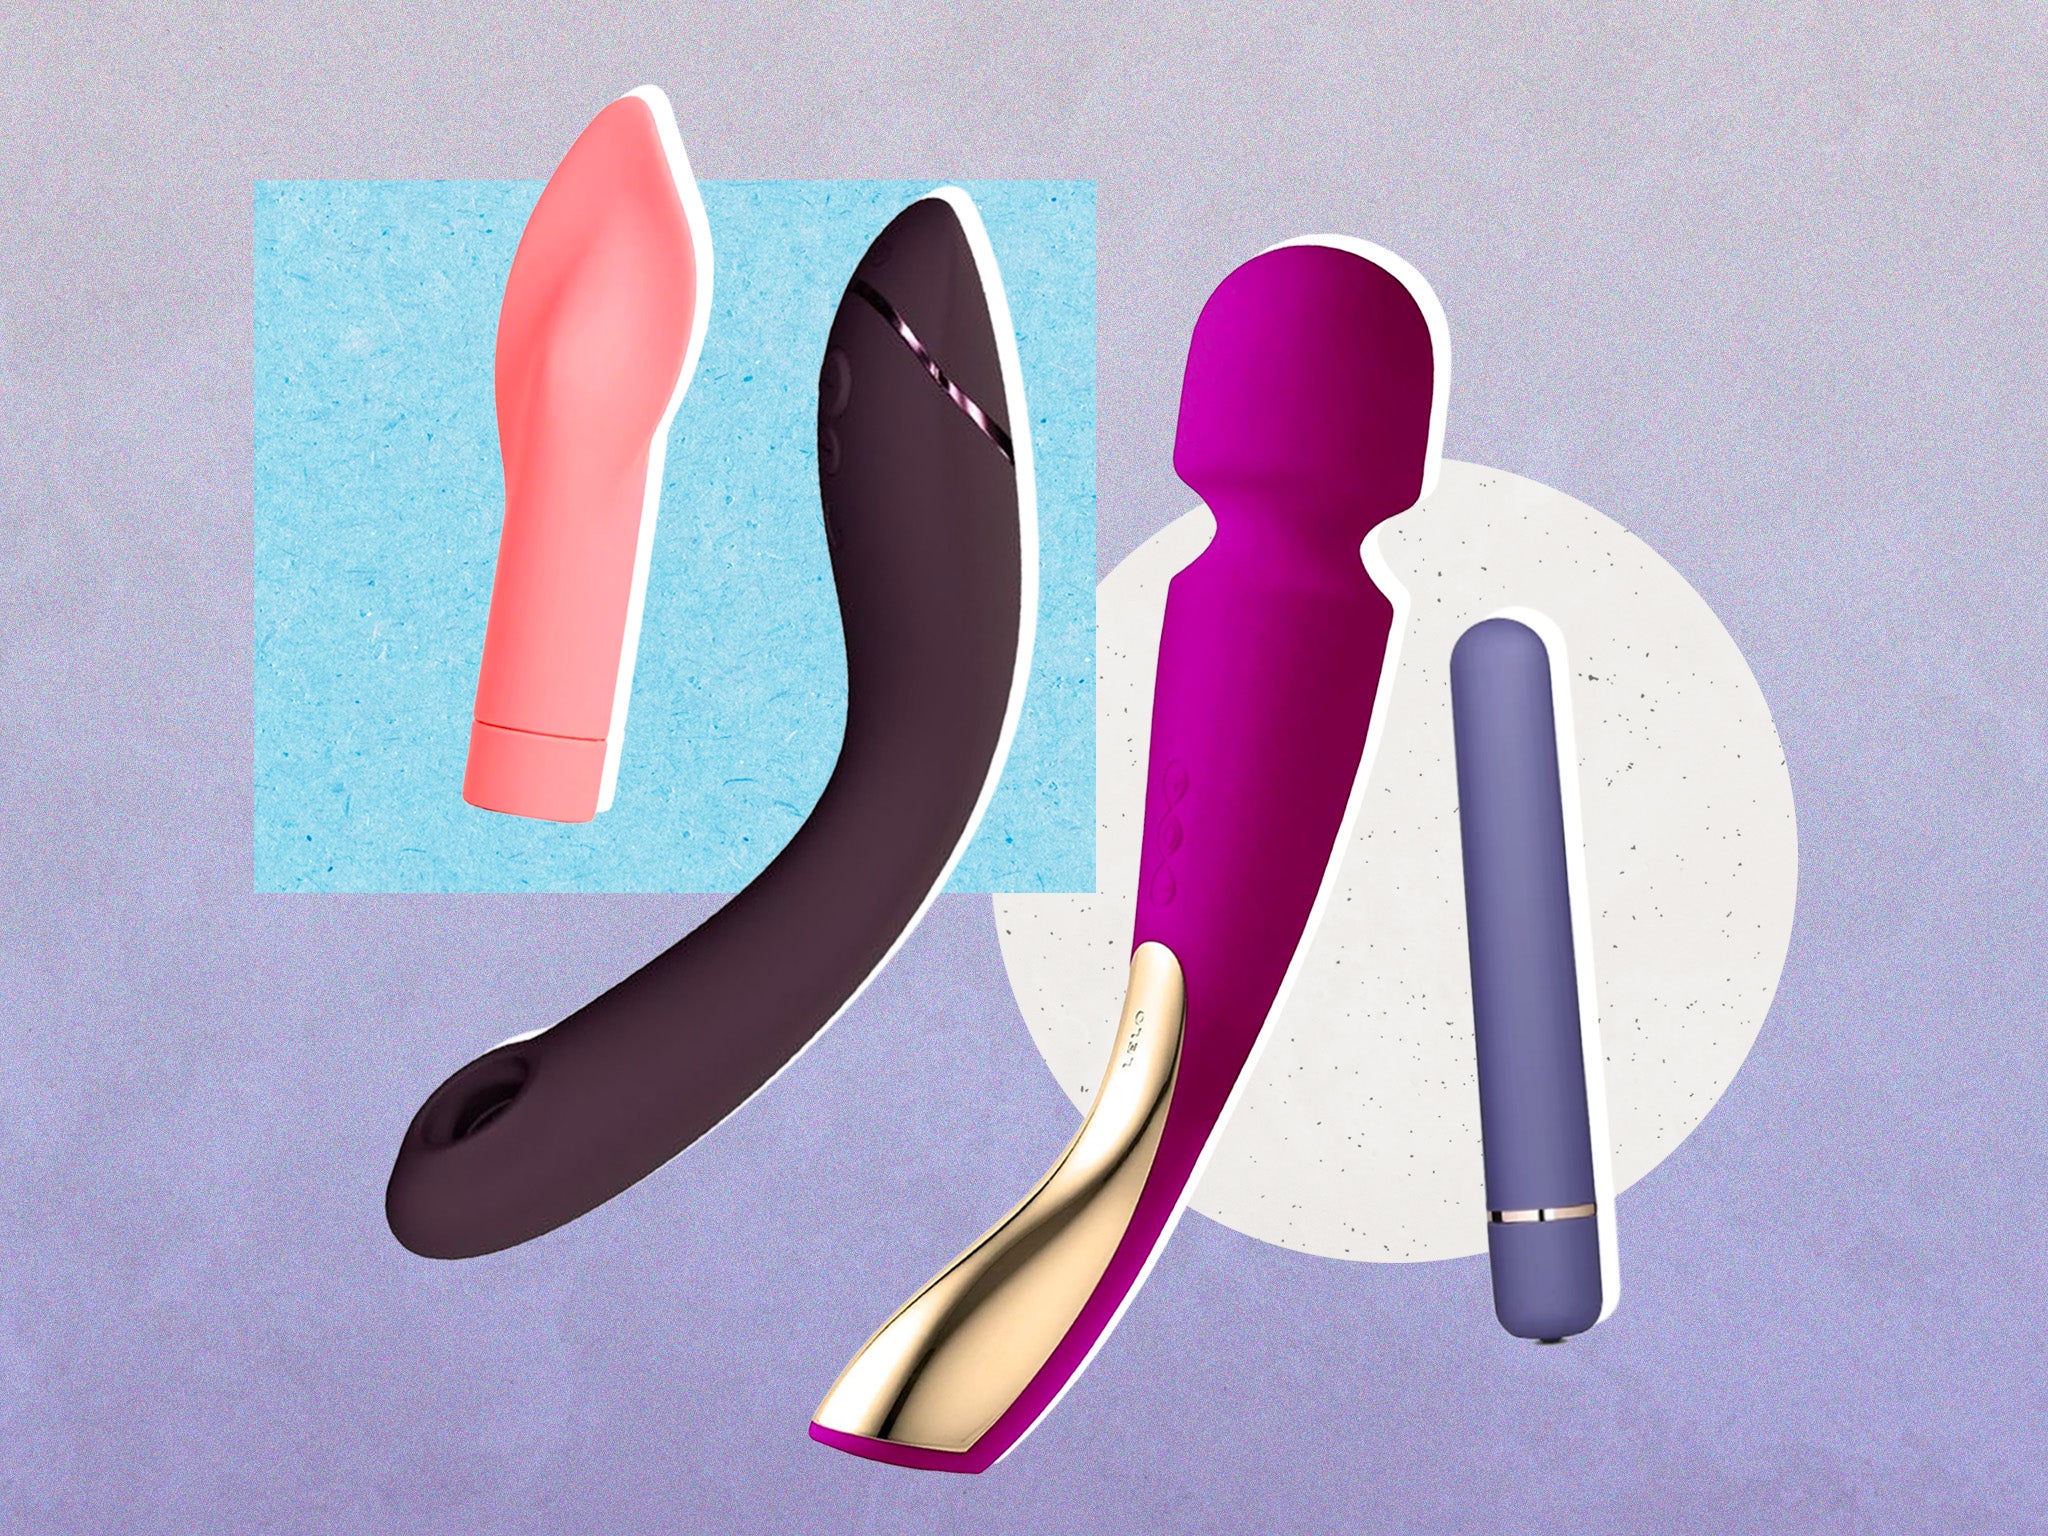 Best sex toys 2023 Vibrators, rabbits, clit stimulators and more The Independent pic picture